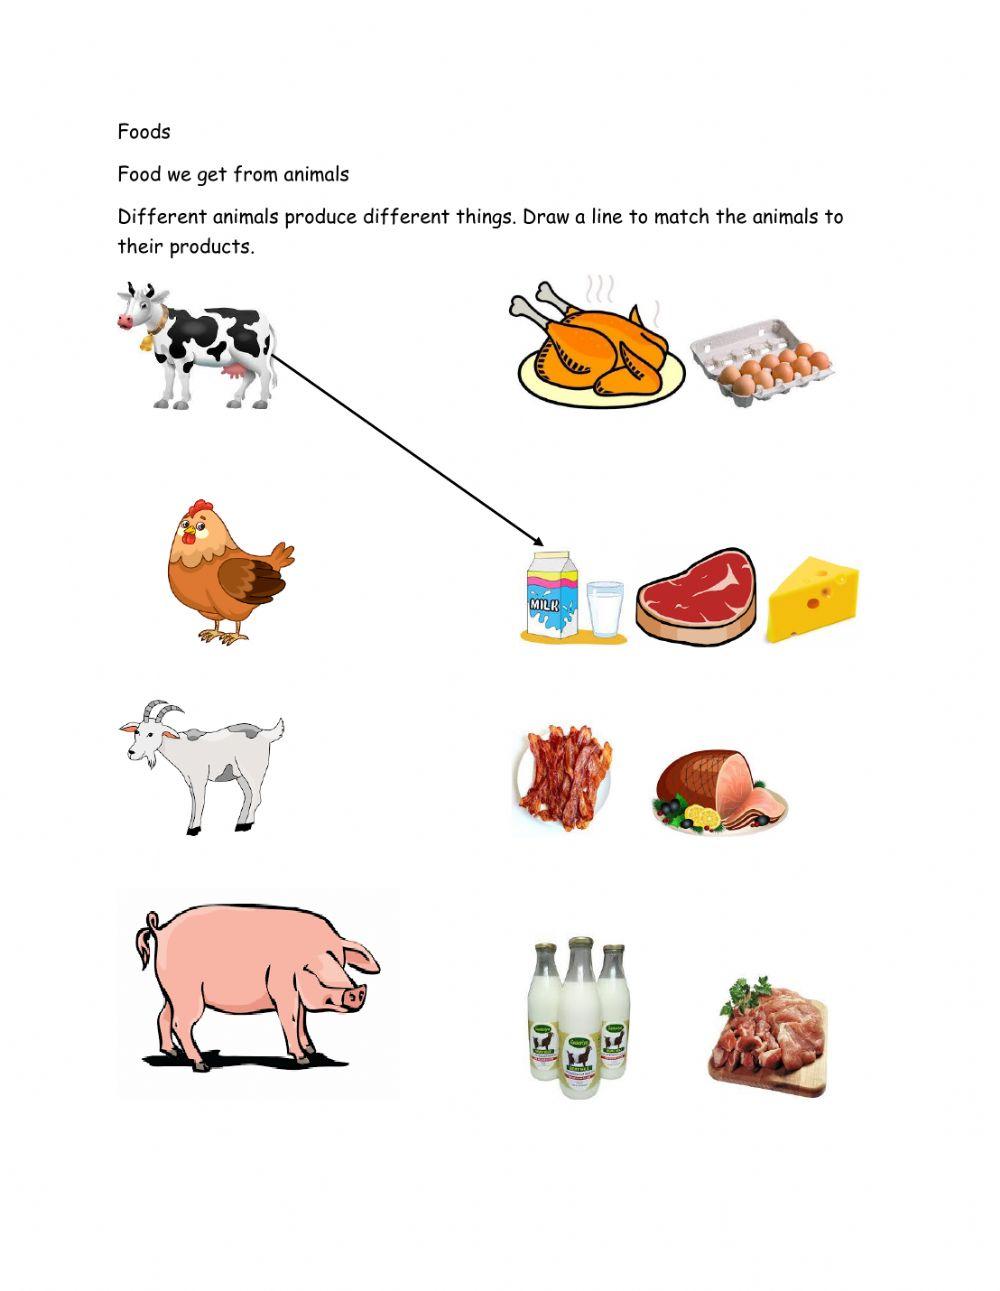 Foods we get from animals